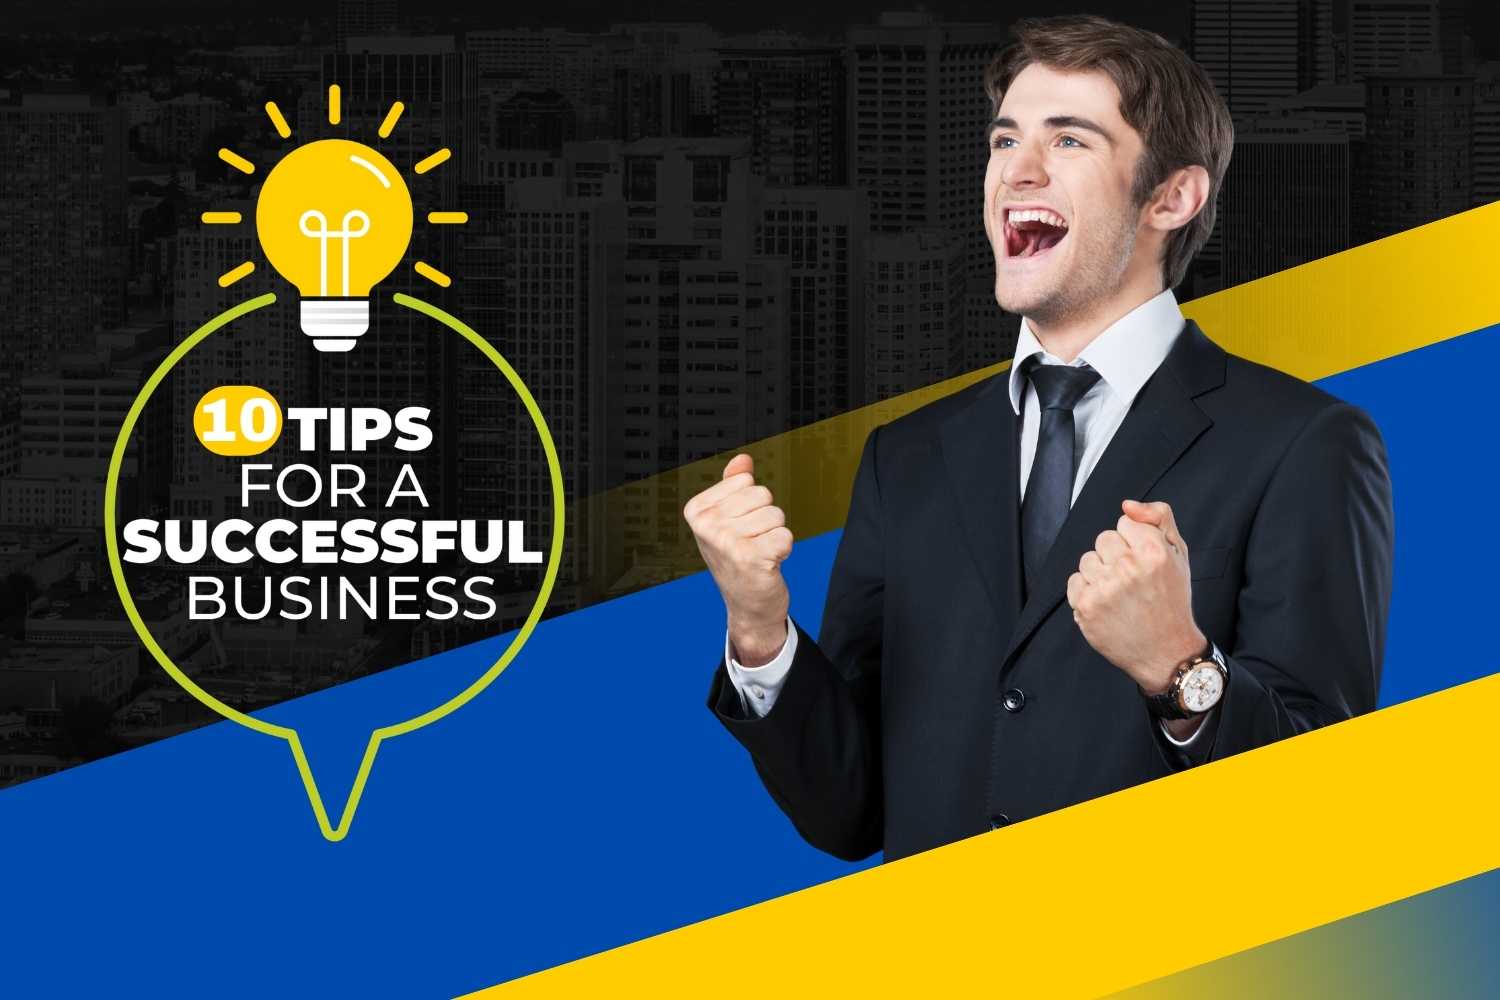 Golden Rules to make a Business Successful - Business Tips